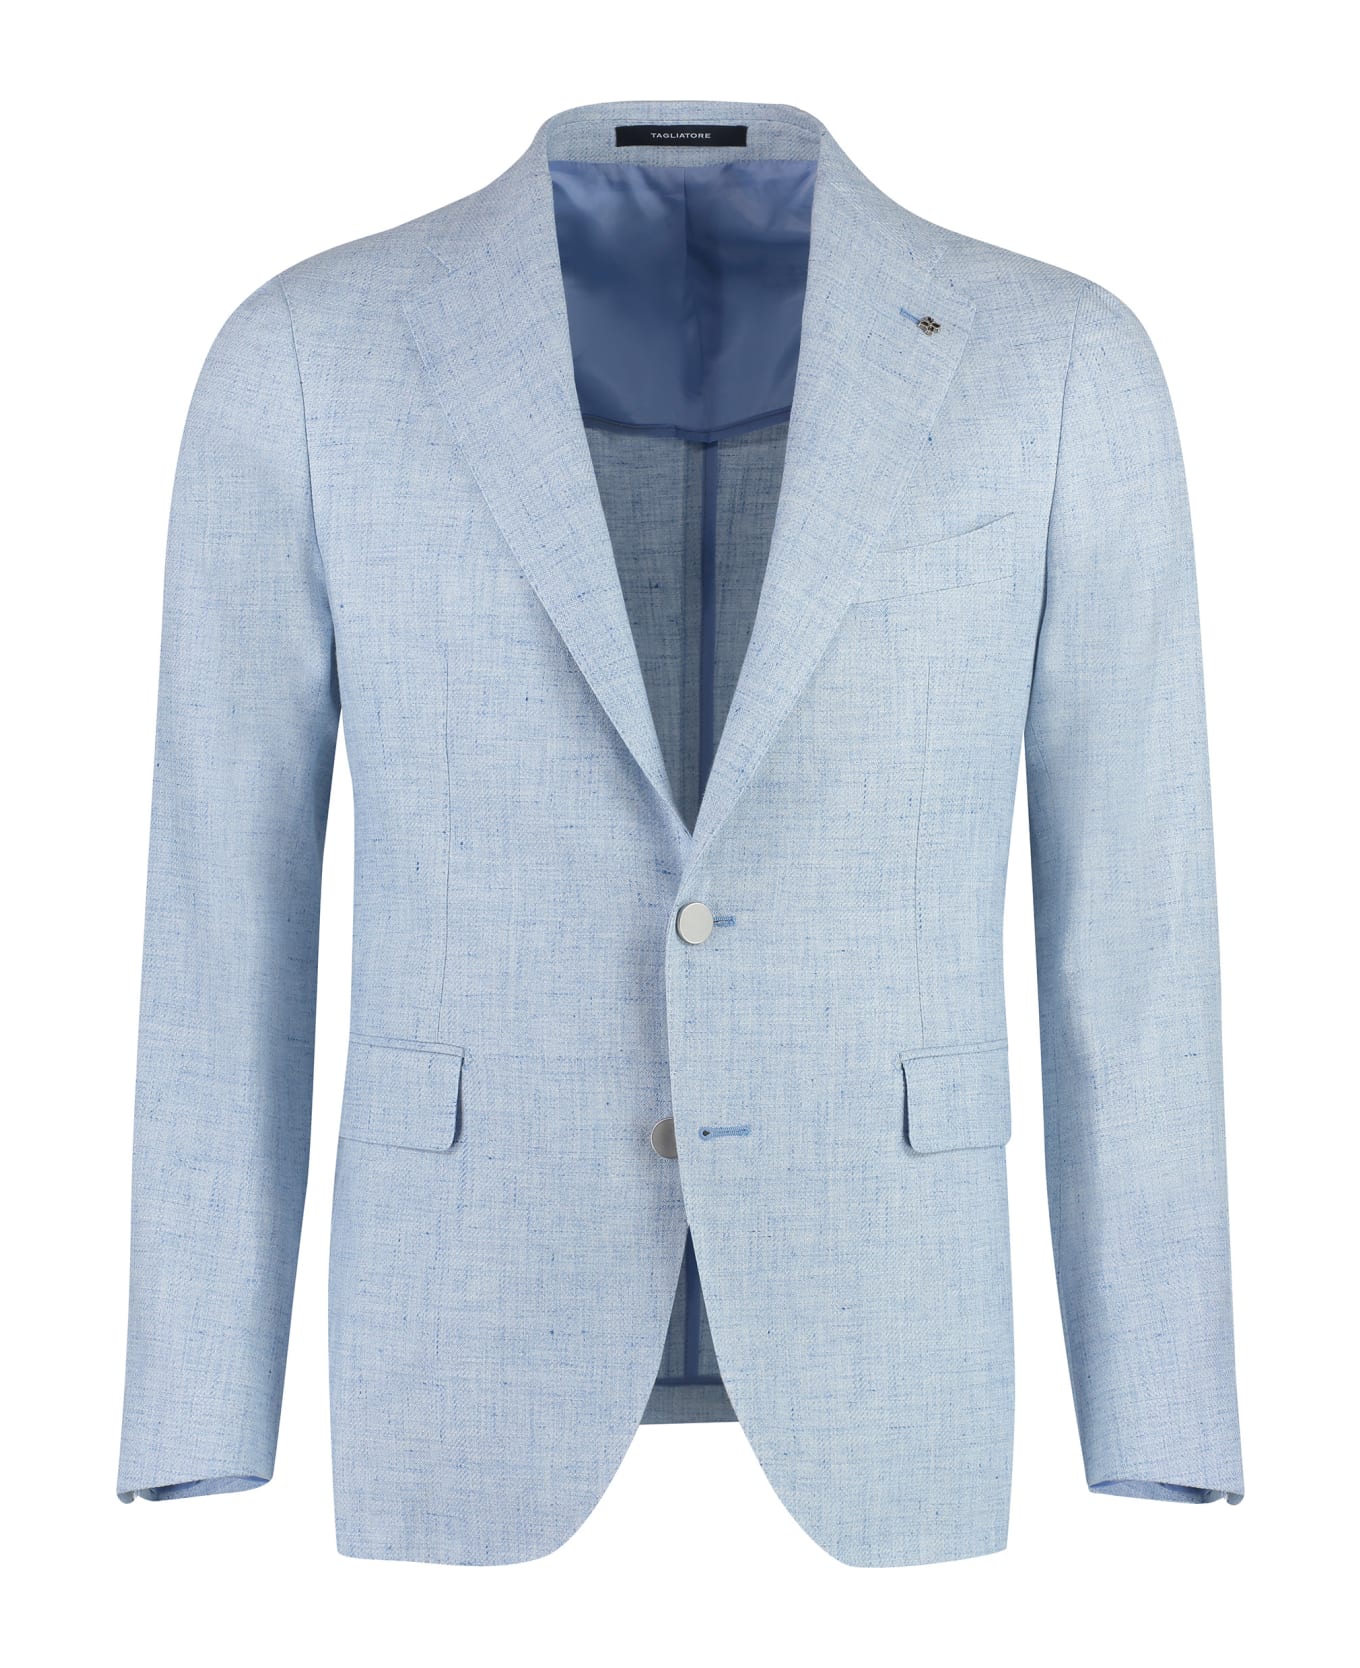 Tagliatore Single-breasted Two-button Jacket - Light Blue